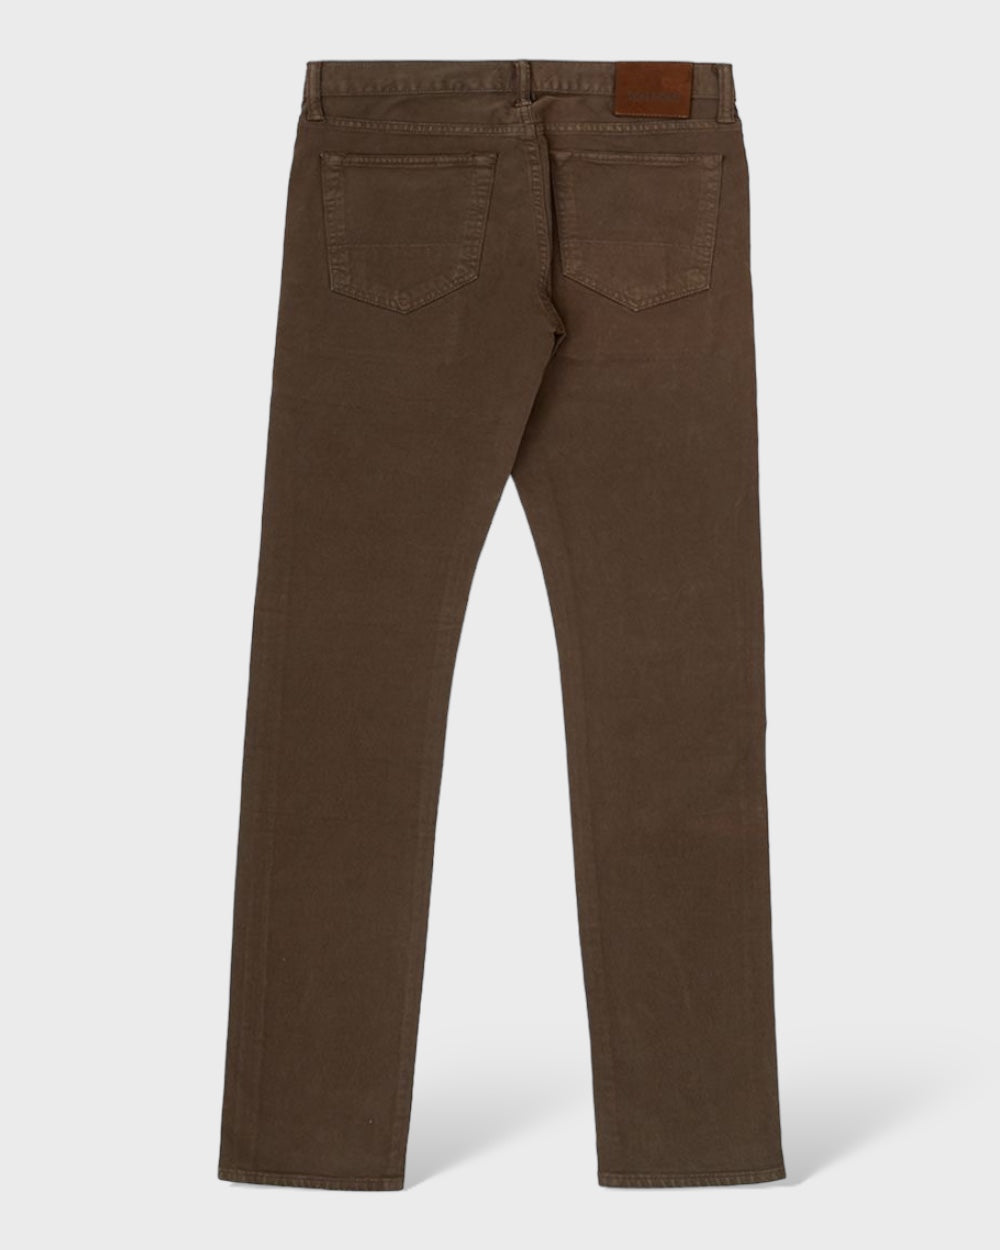 Tom Ford Mud Colored Five Pockets Jeans Pants